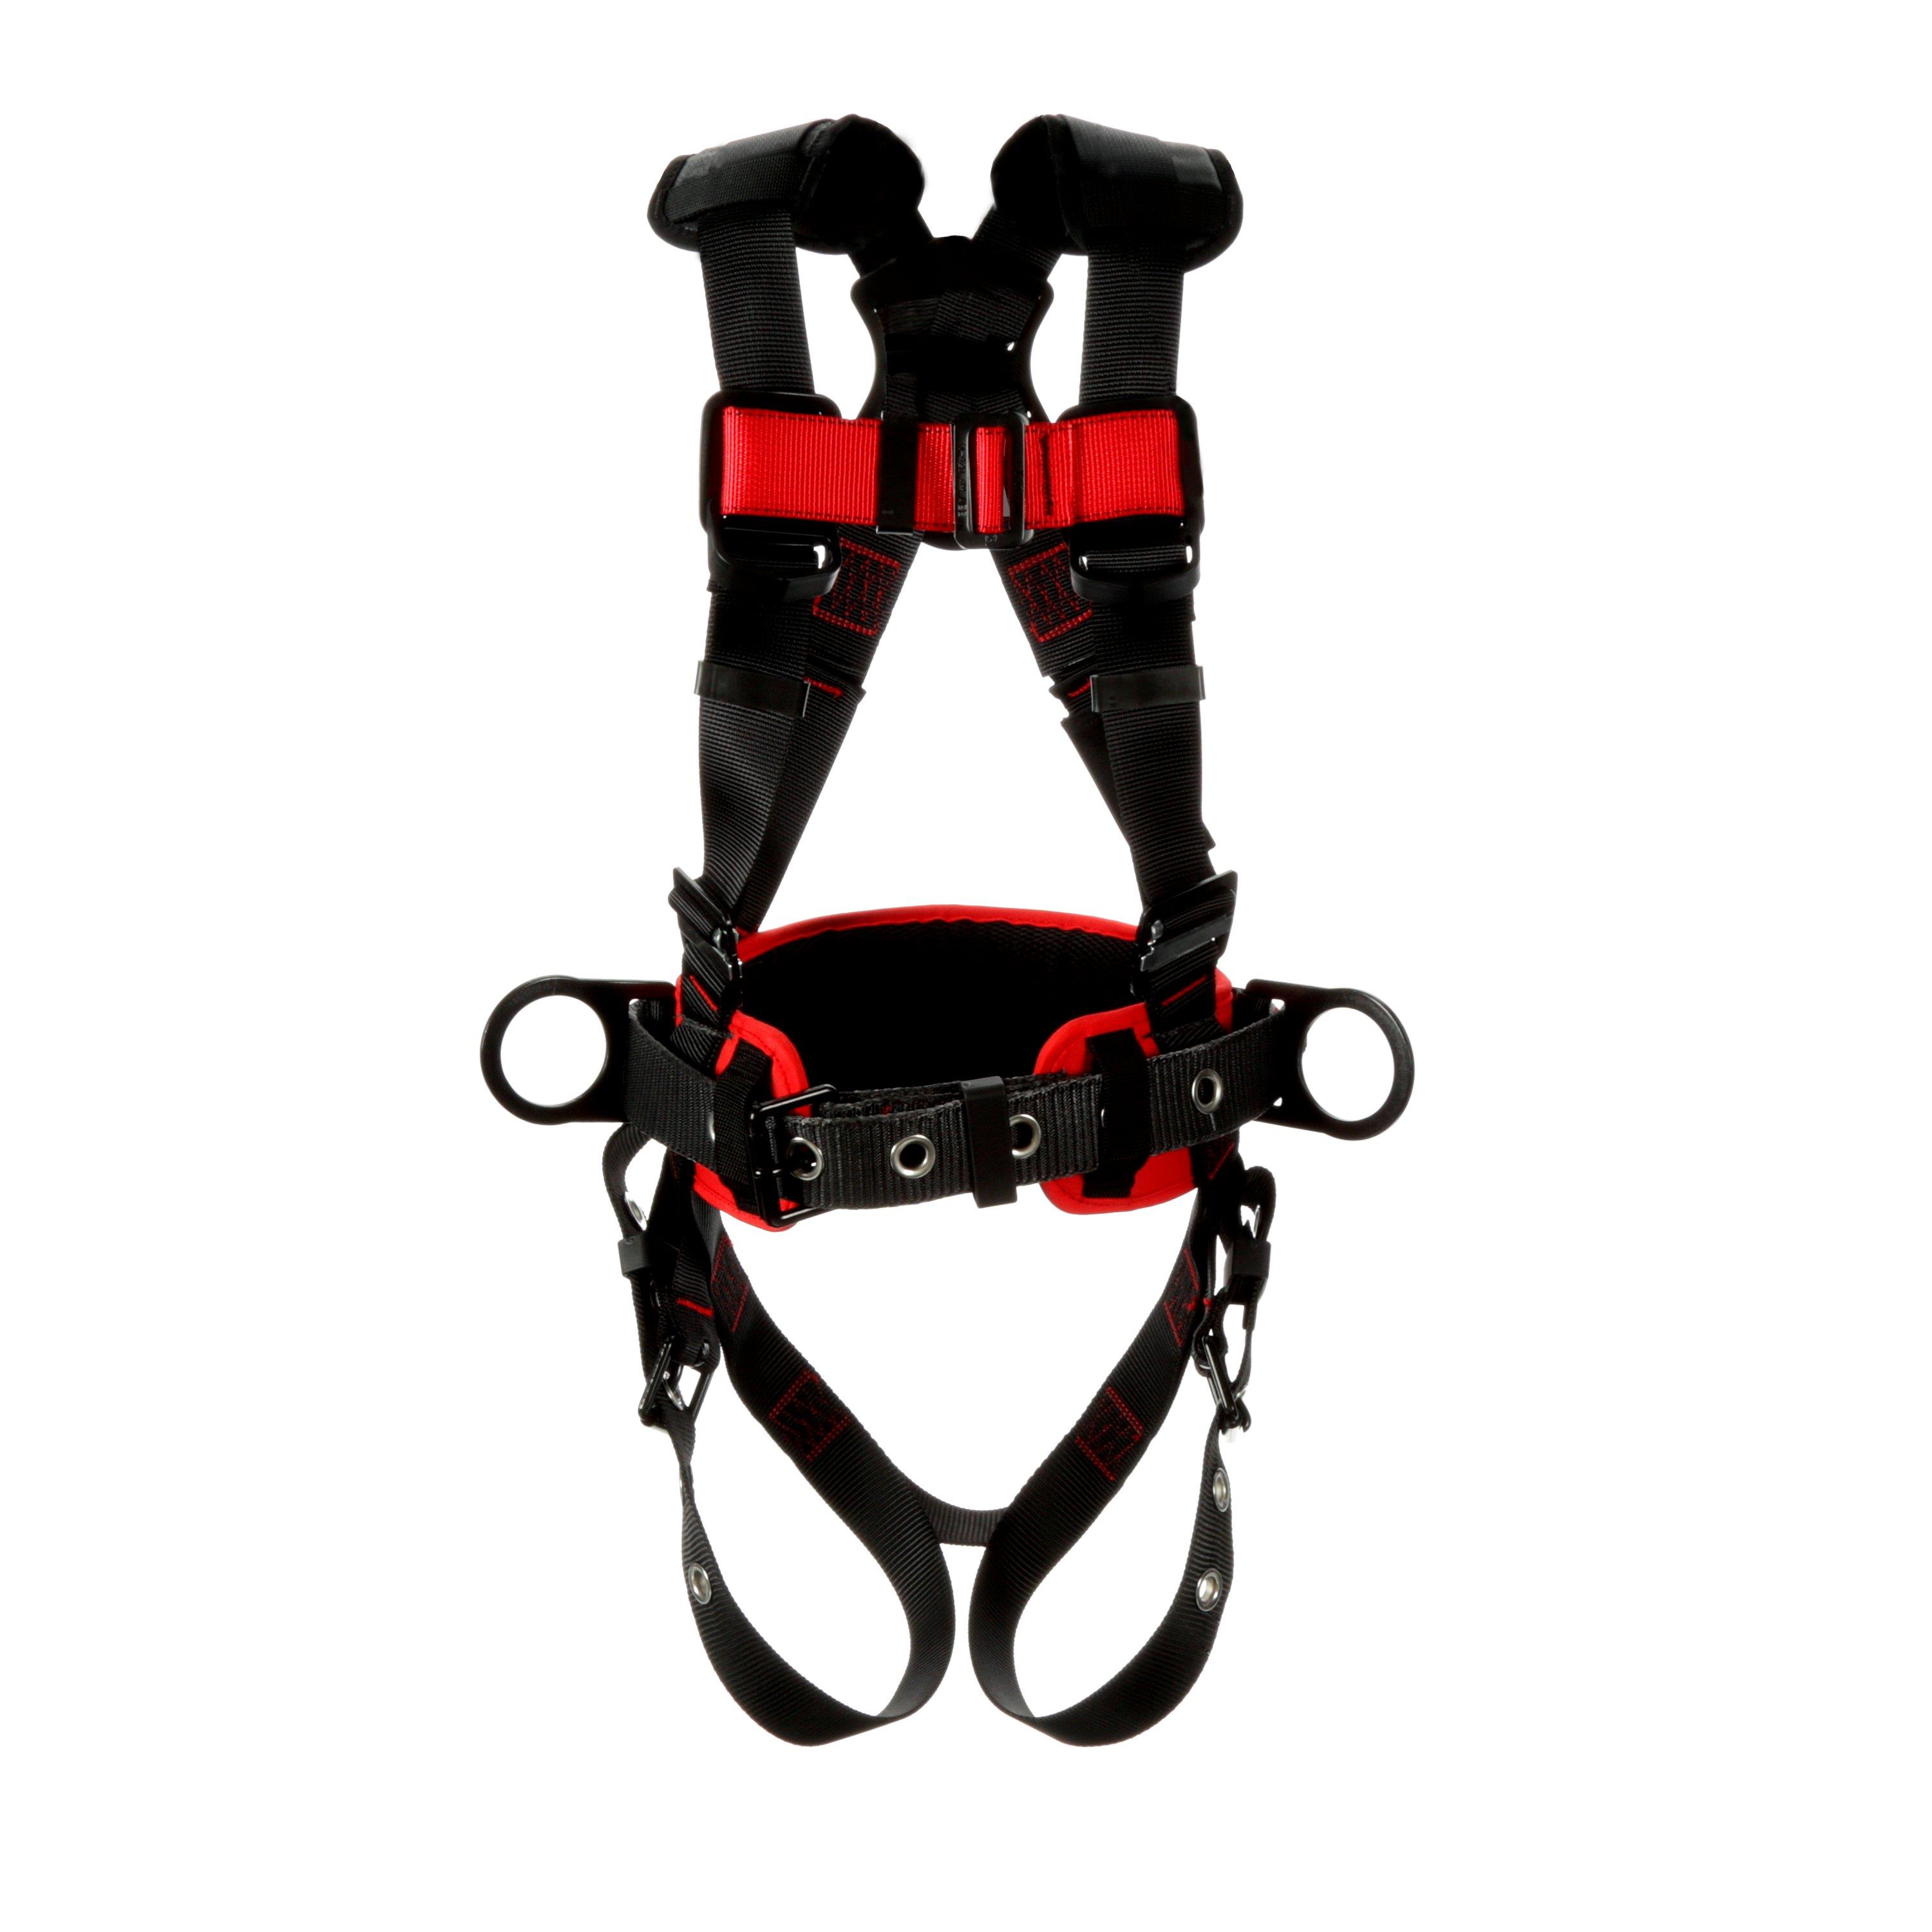 Protecta Pro Construction Harness TB 3Ds - Harnesses